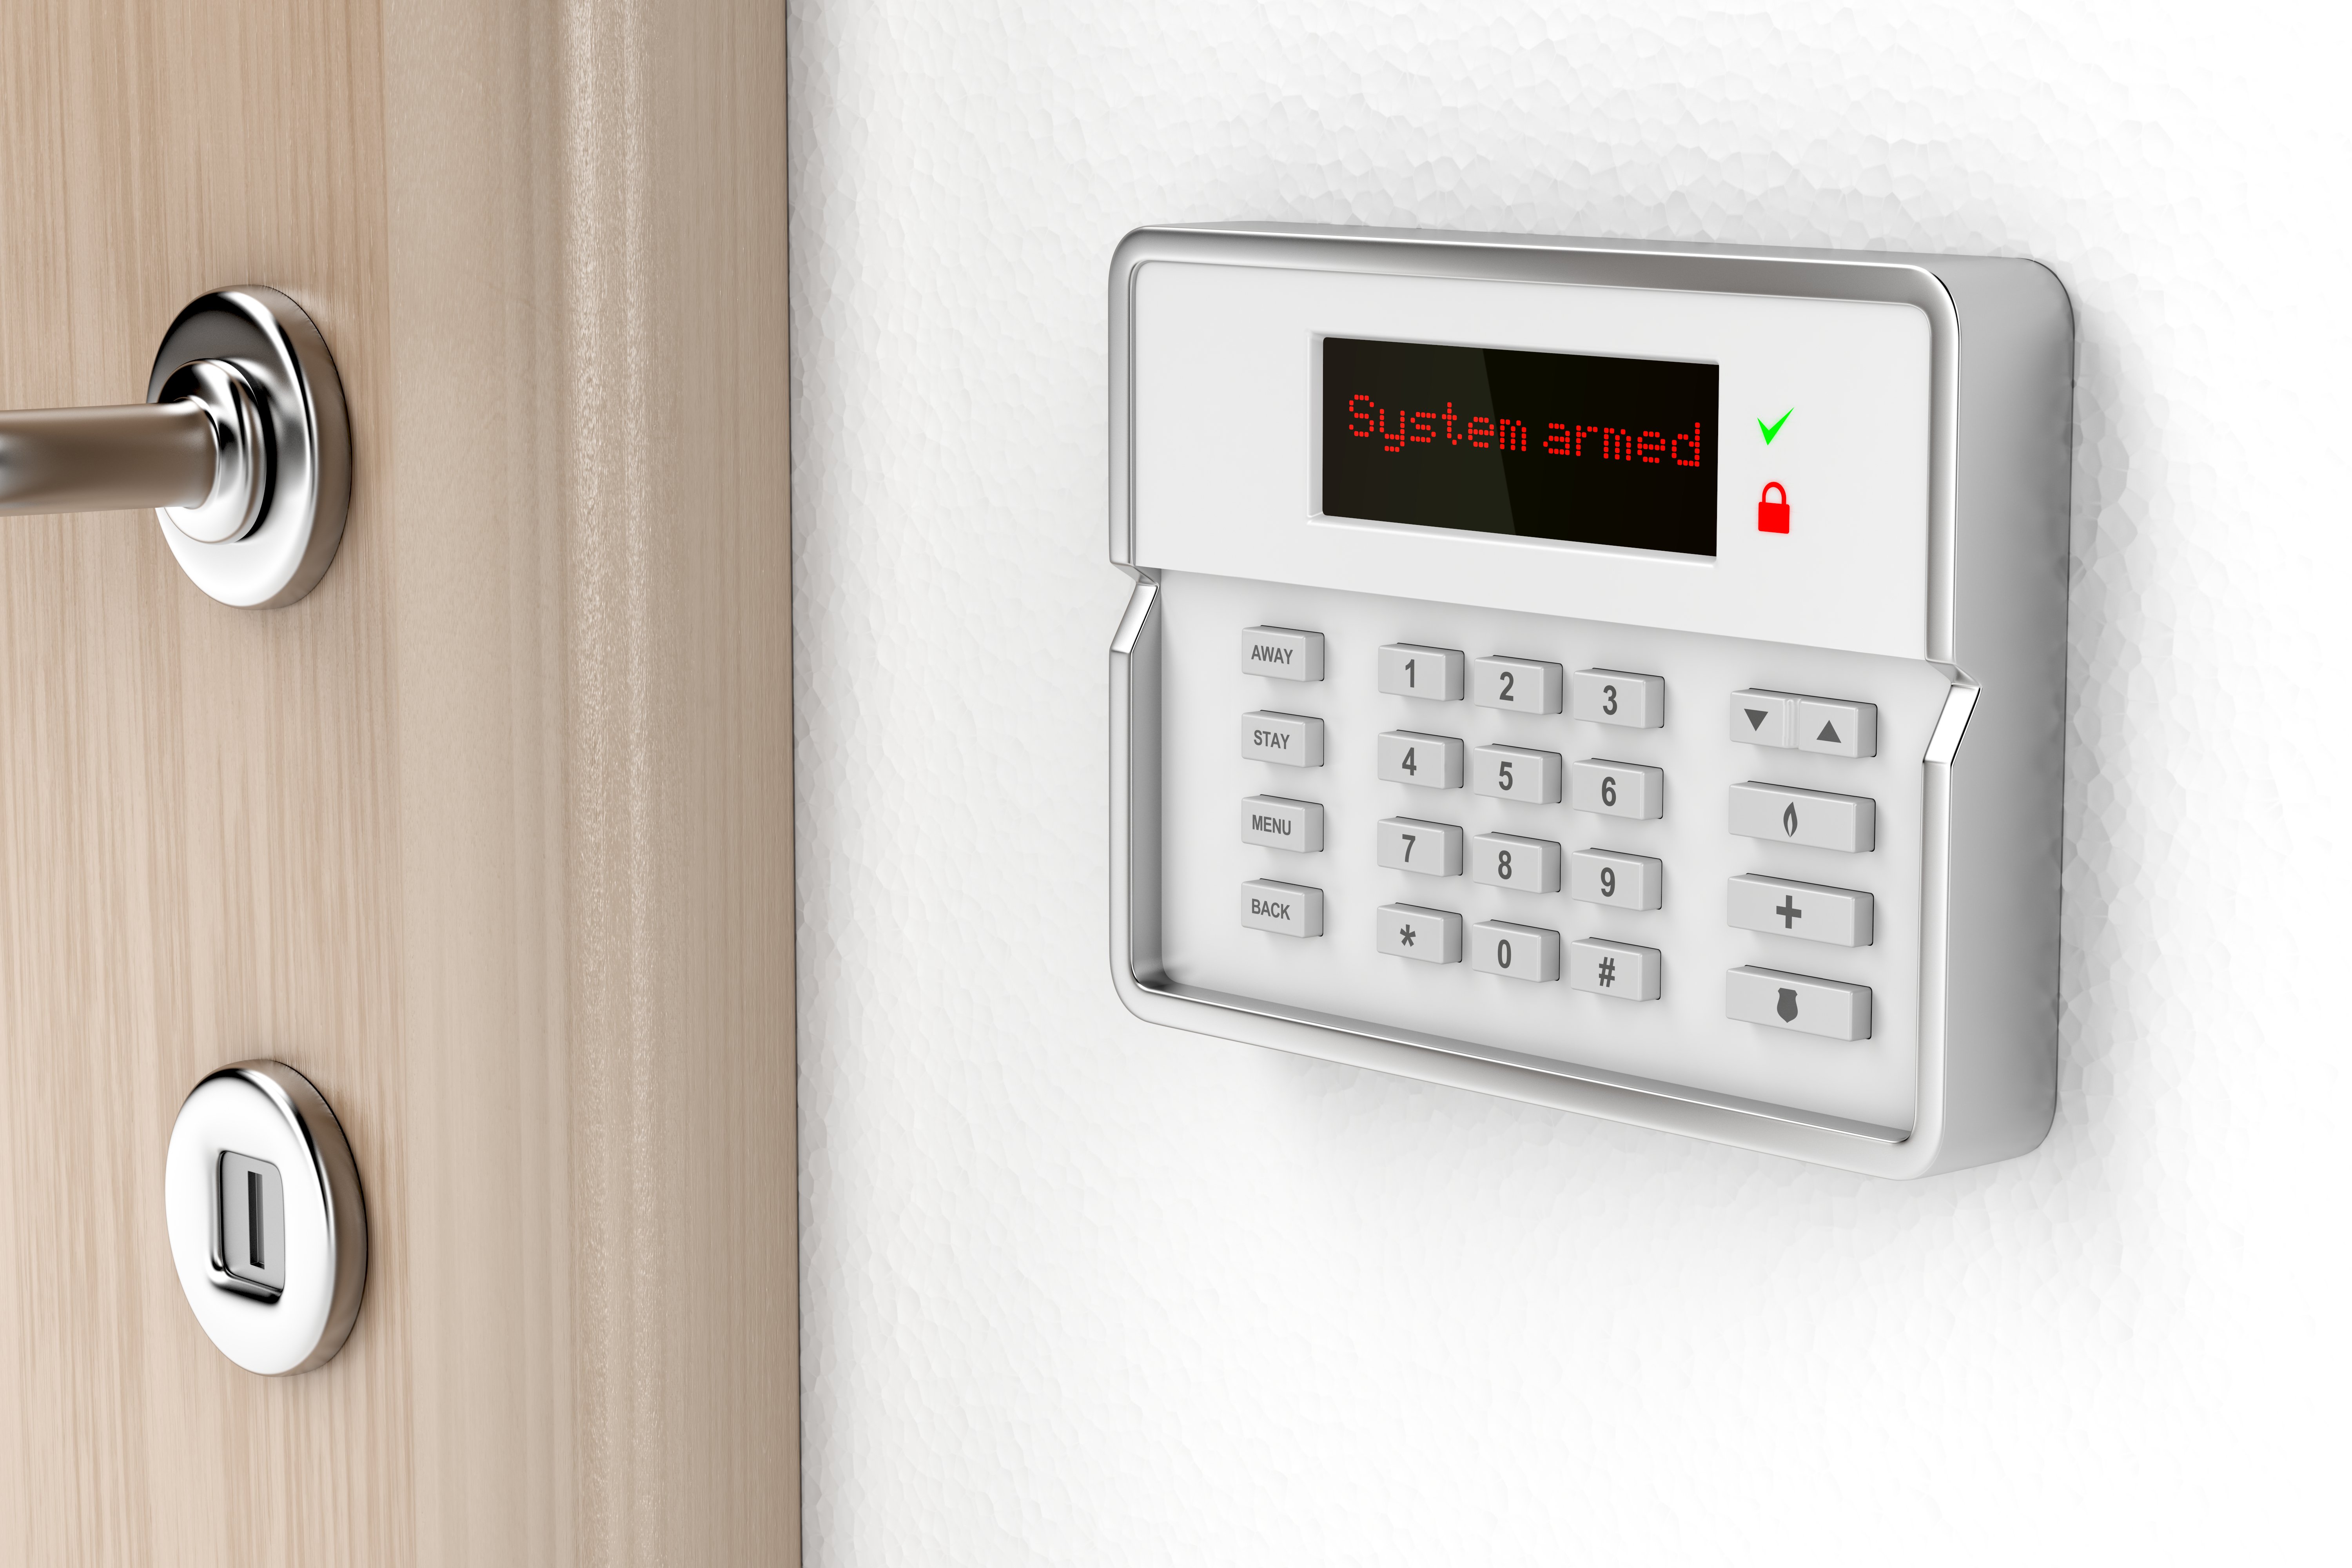 An installed security system inside a home | Photo: Shutterstock